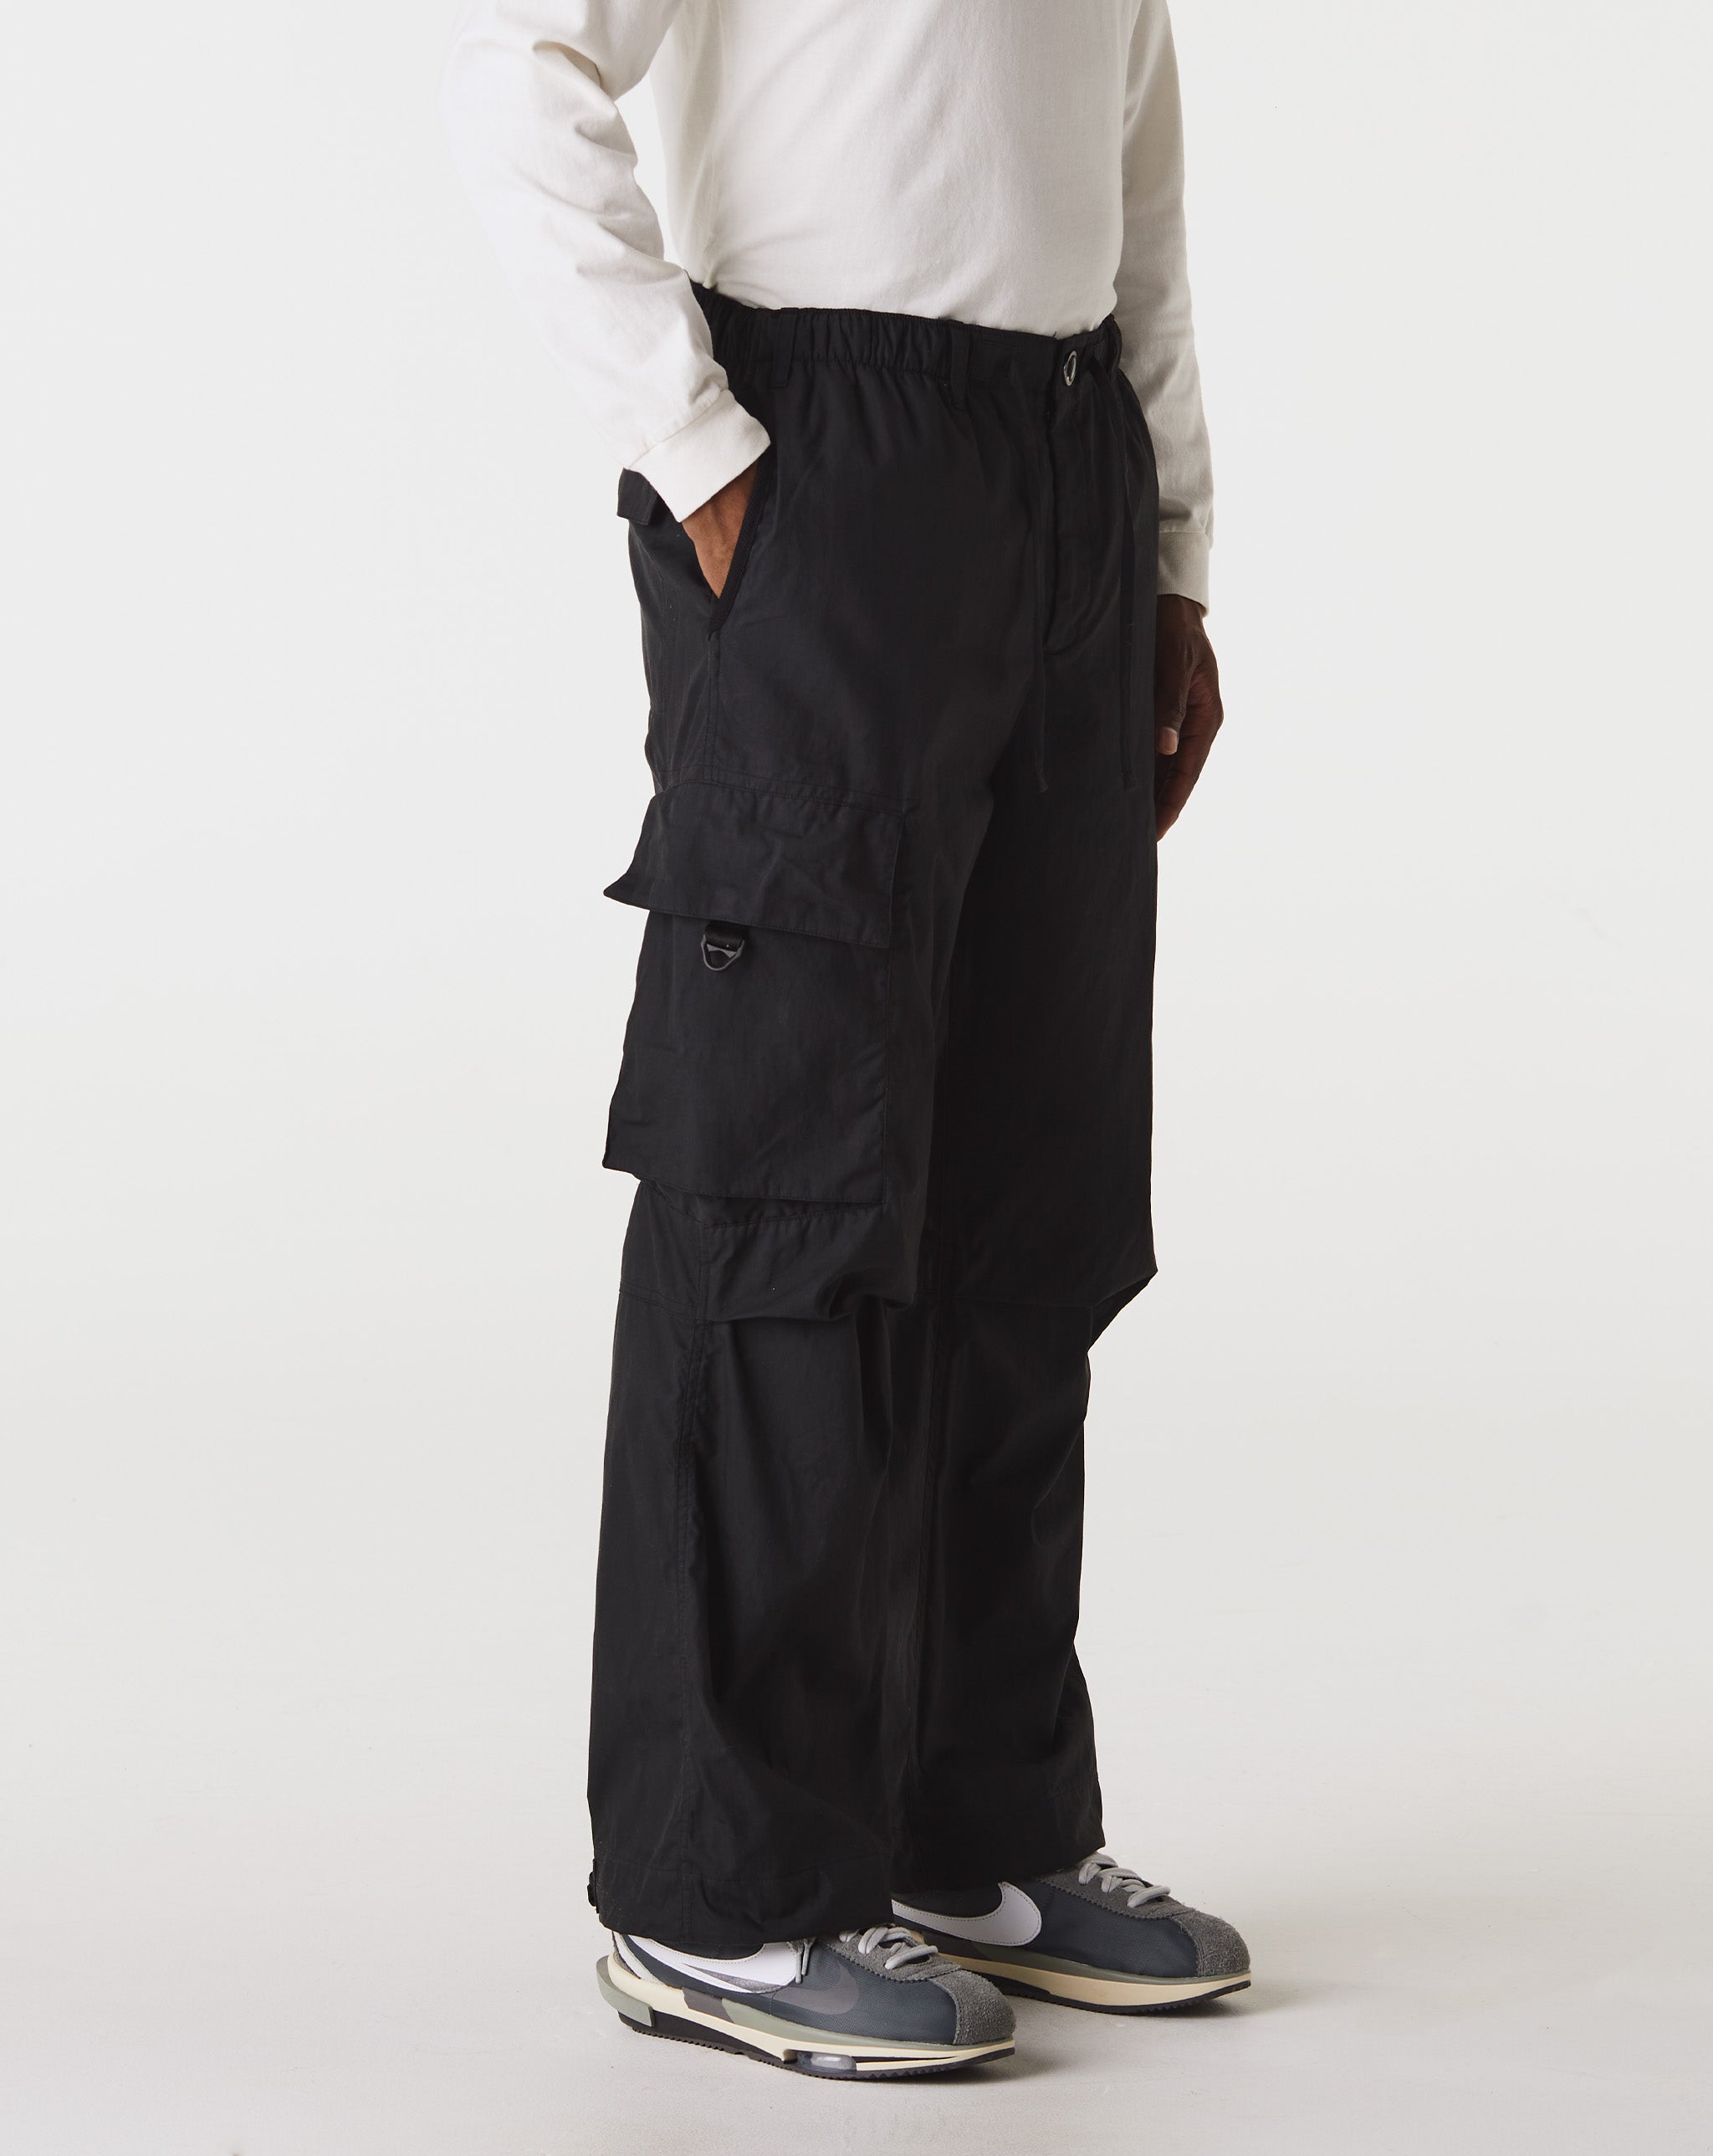 Nike trousers with logo acne studios trousers indigo blue  - Cheap Cerbe Jordan outlet